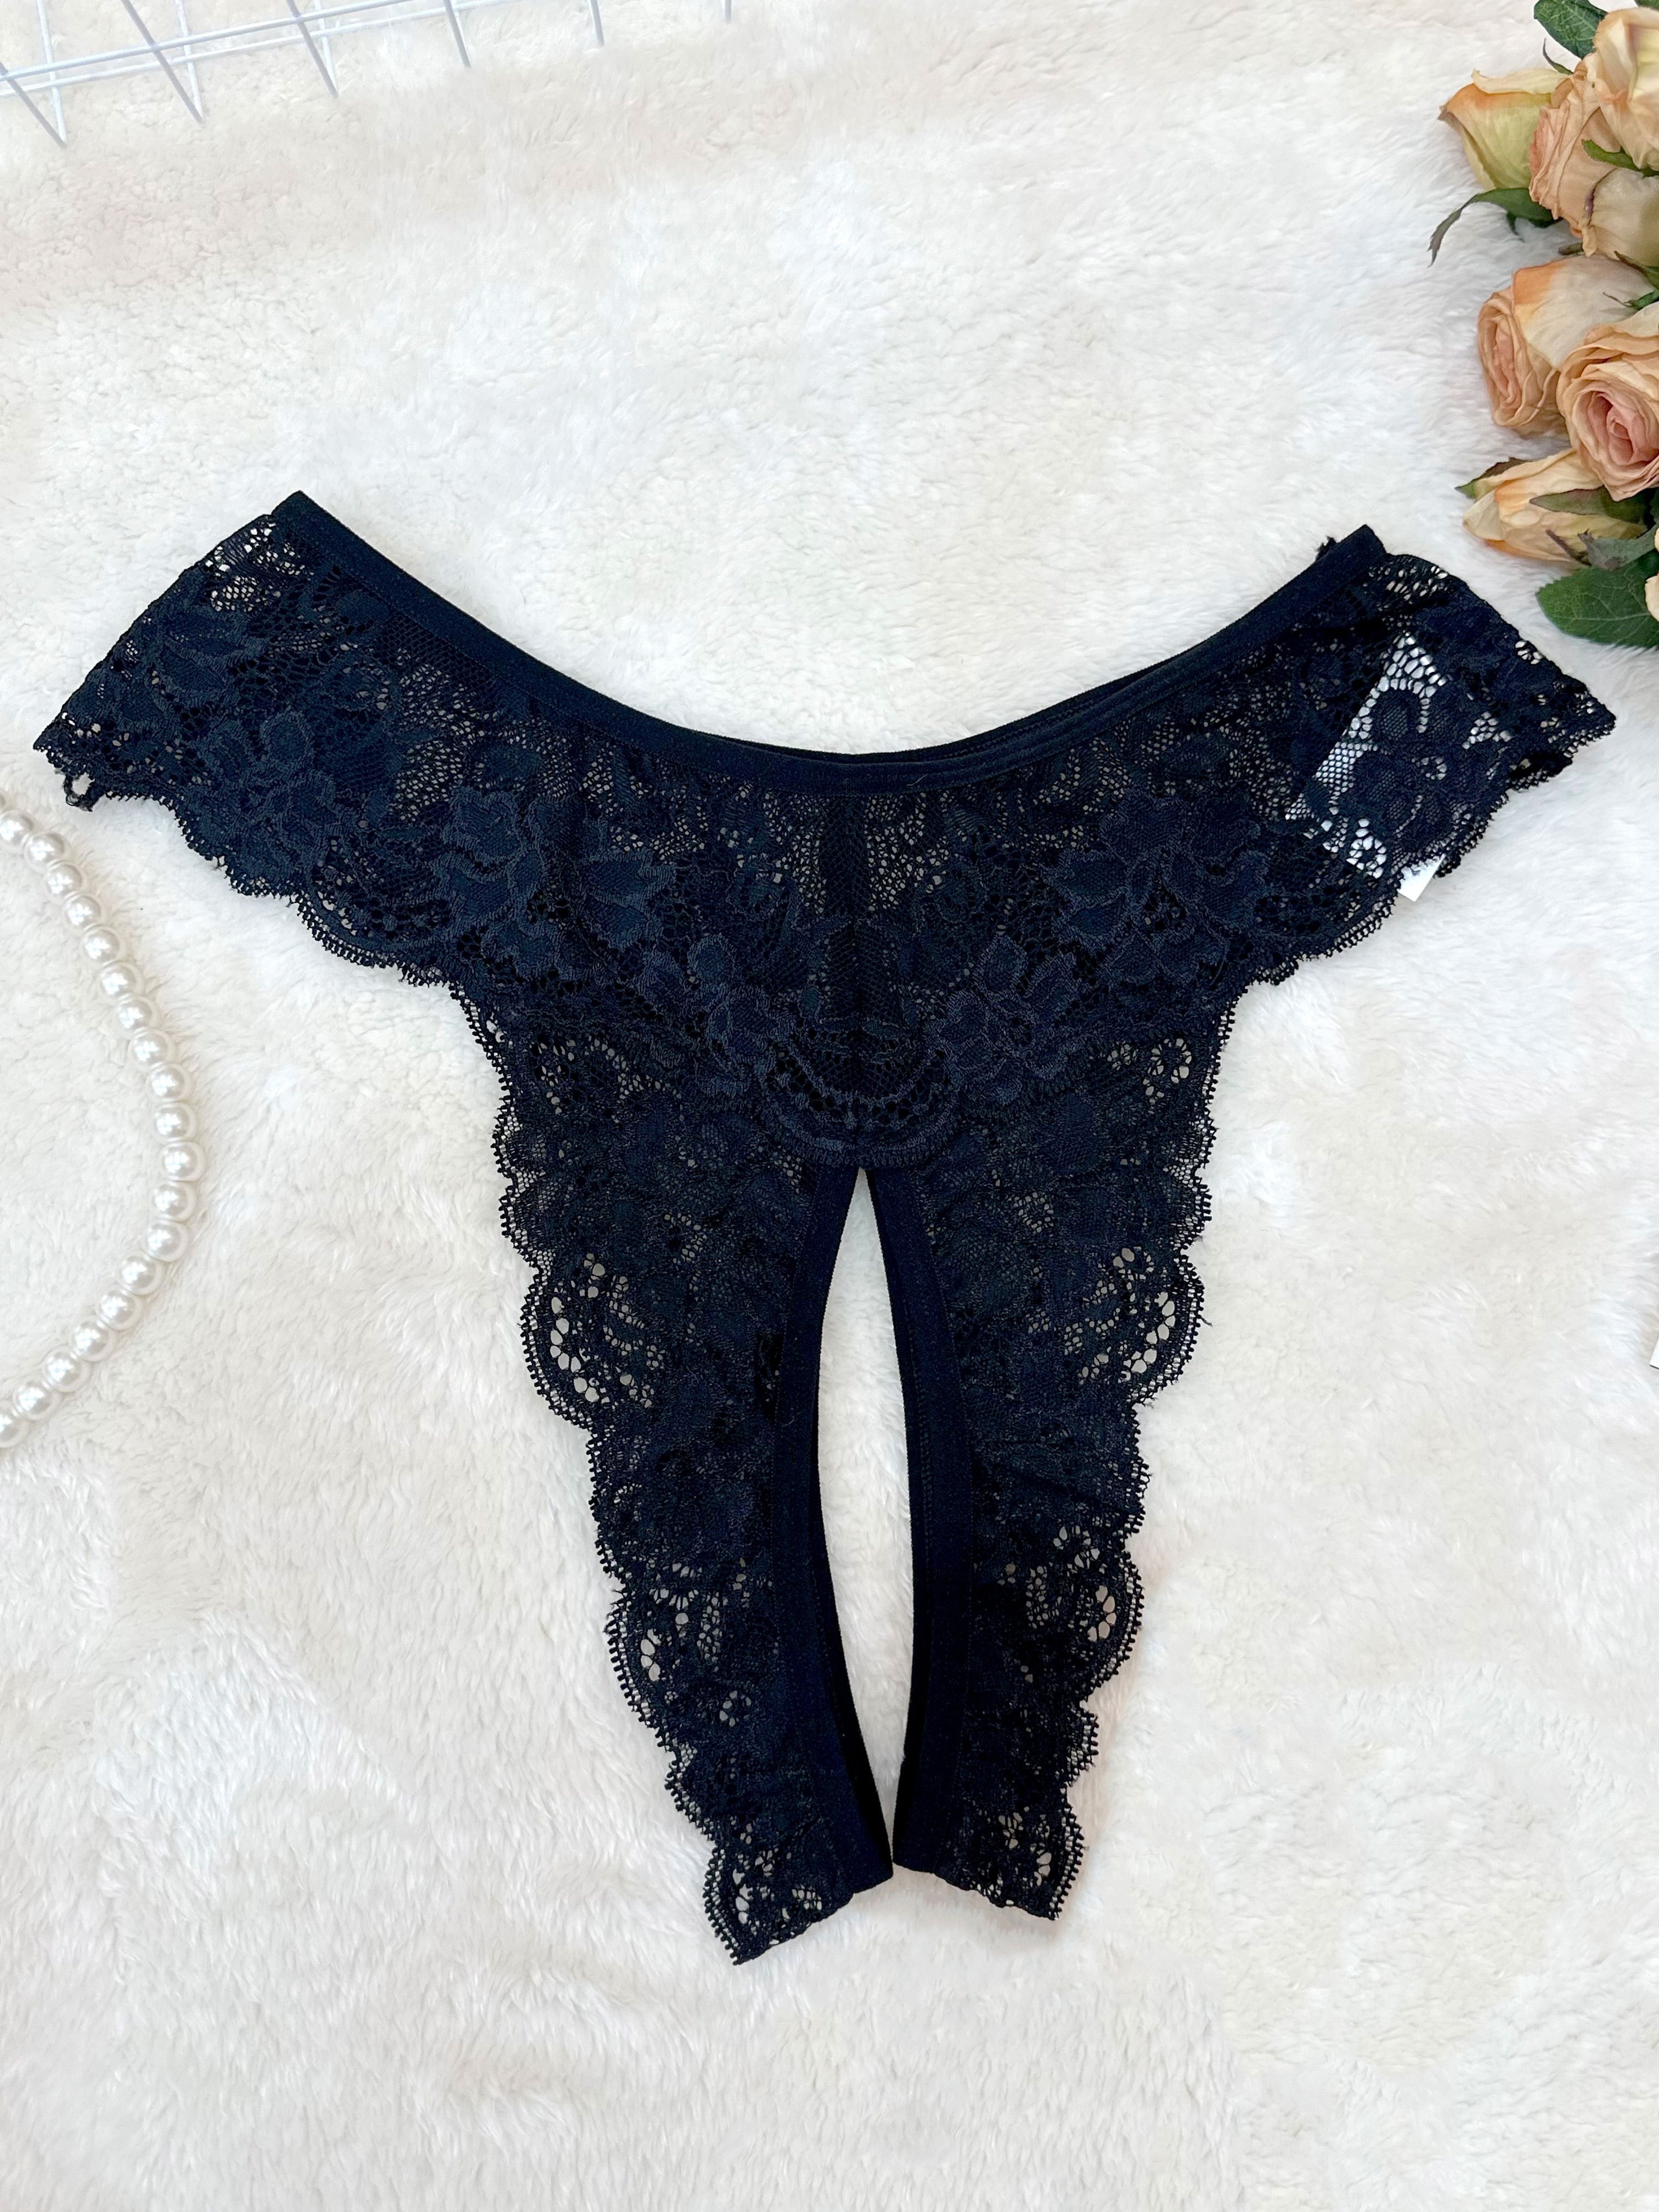 Idelle Floral Lace Open Crotch Hipster